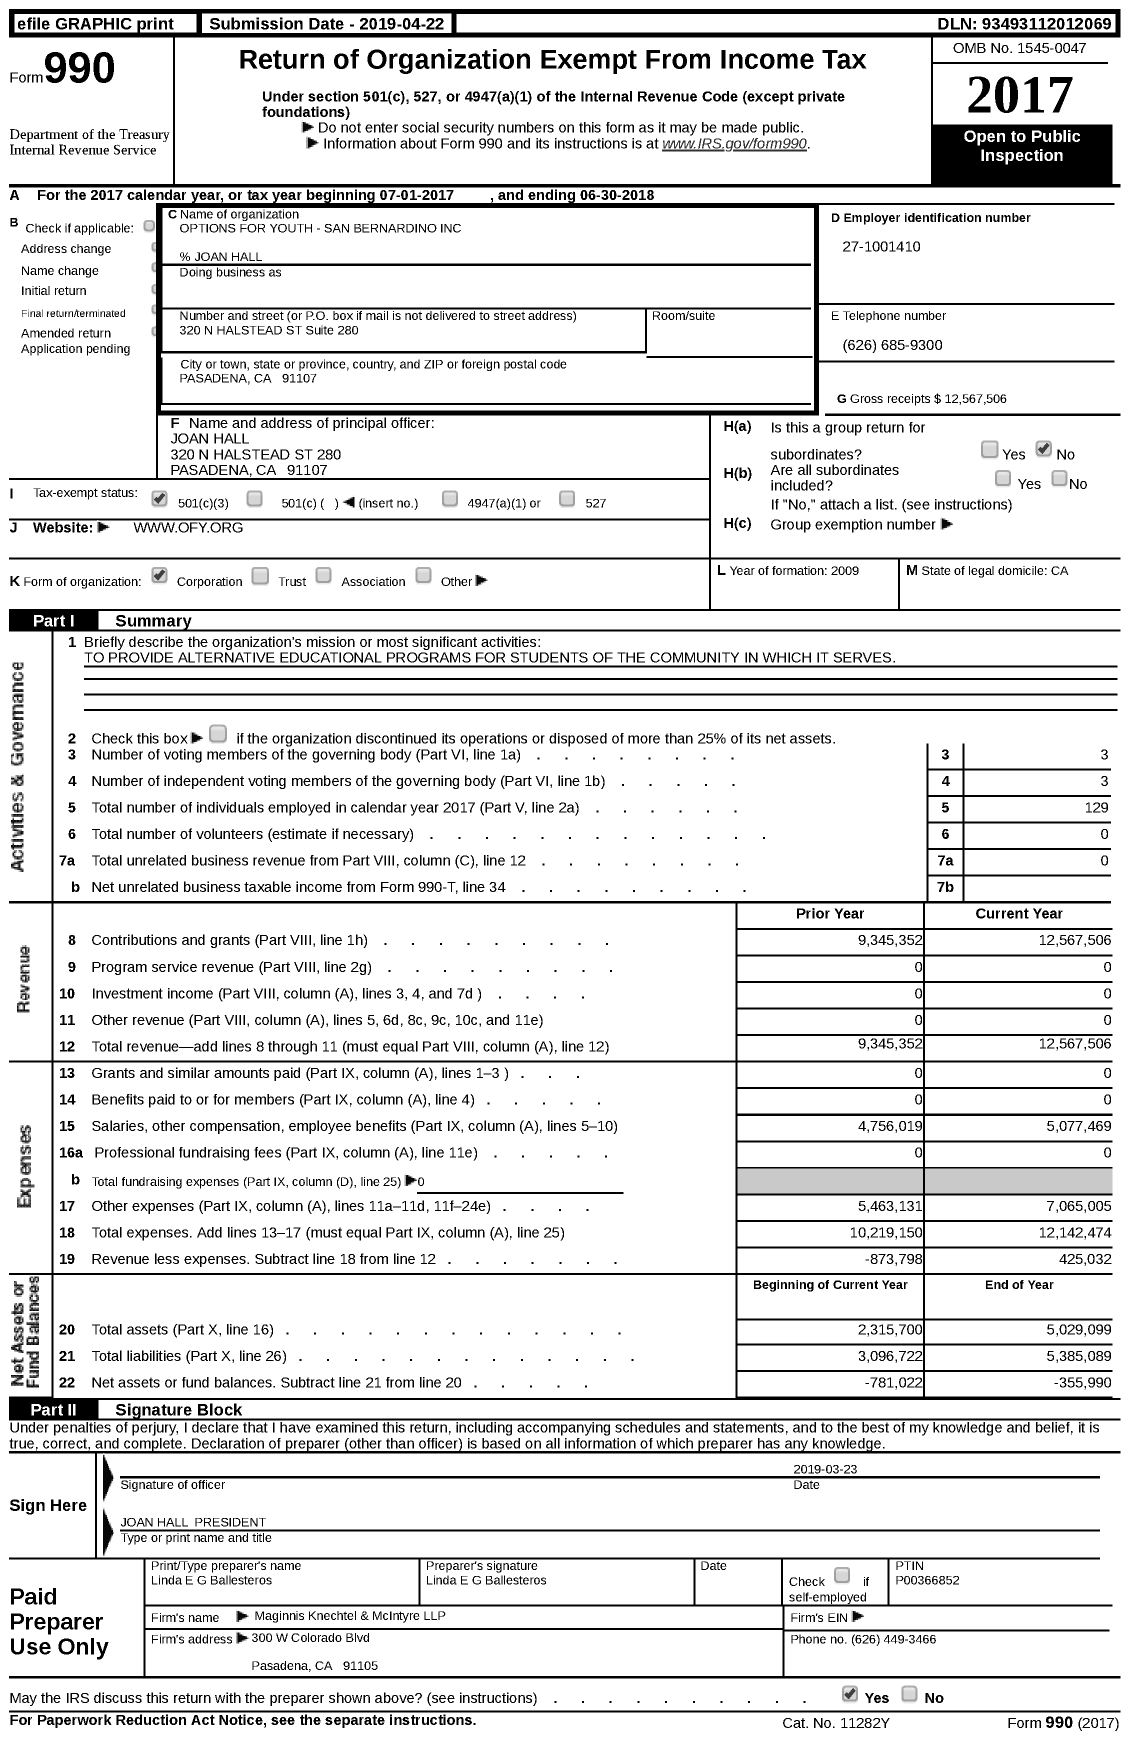 Image of first page of 2017 Form 990 for Options for Youth - San Bernardino (OFY)